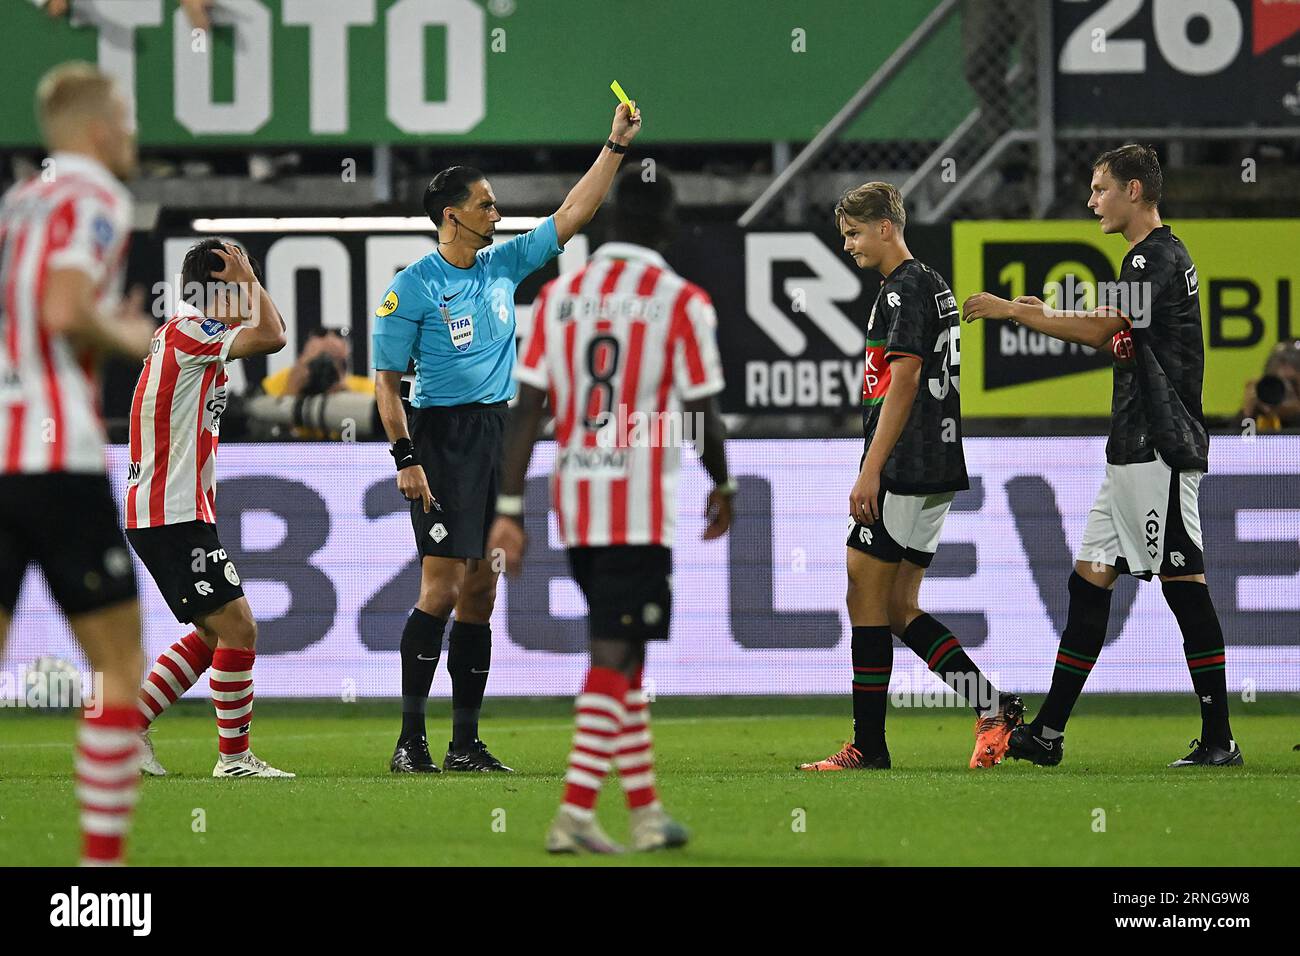 ROTTERDAM - Luc Netten of NEC (2r) is shown a yellow card by referee ...